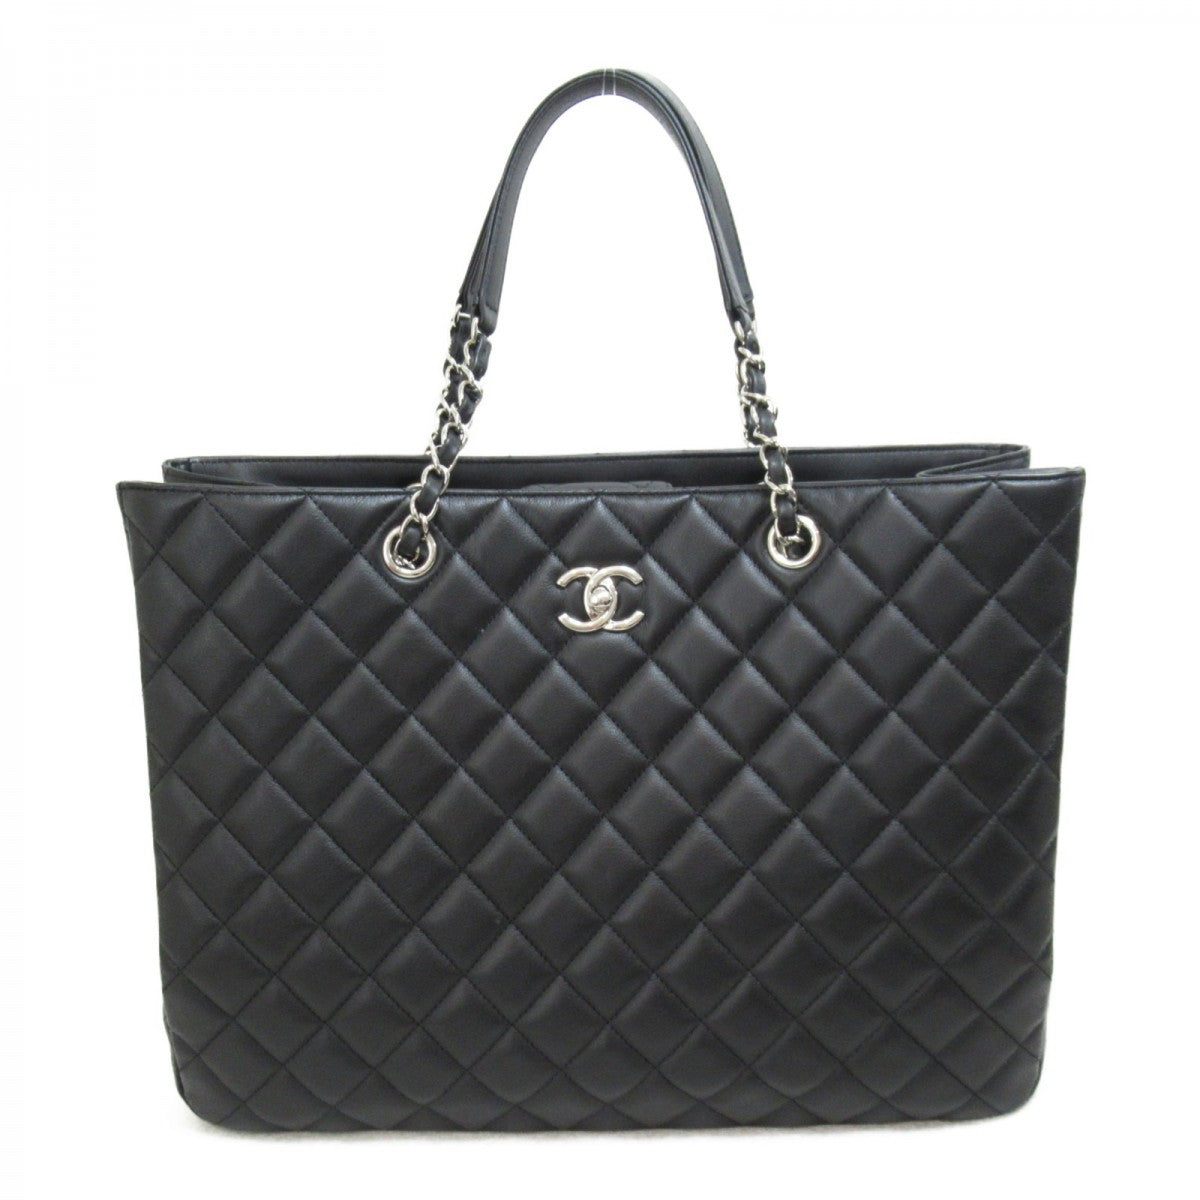 CC Quilted Leather Chain Tote Bag A91046